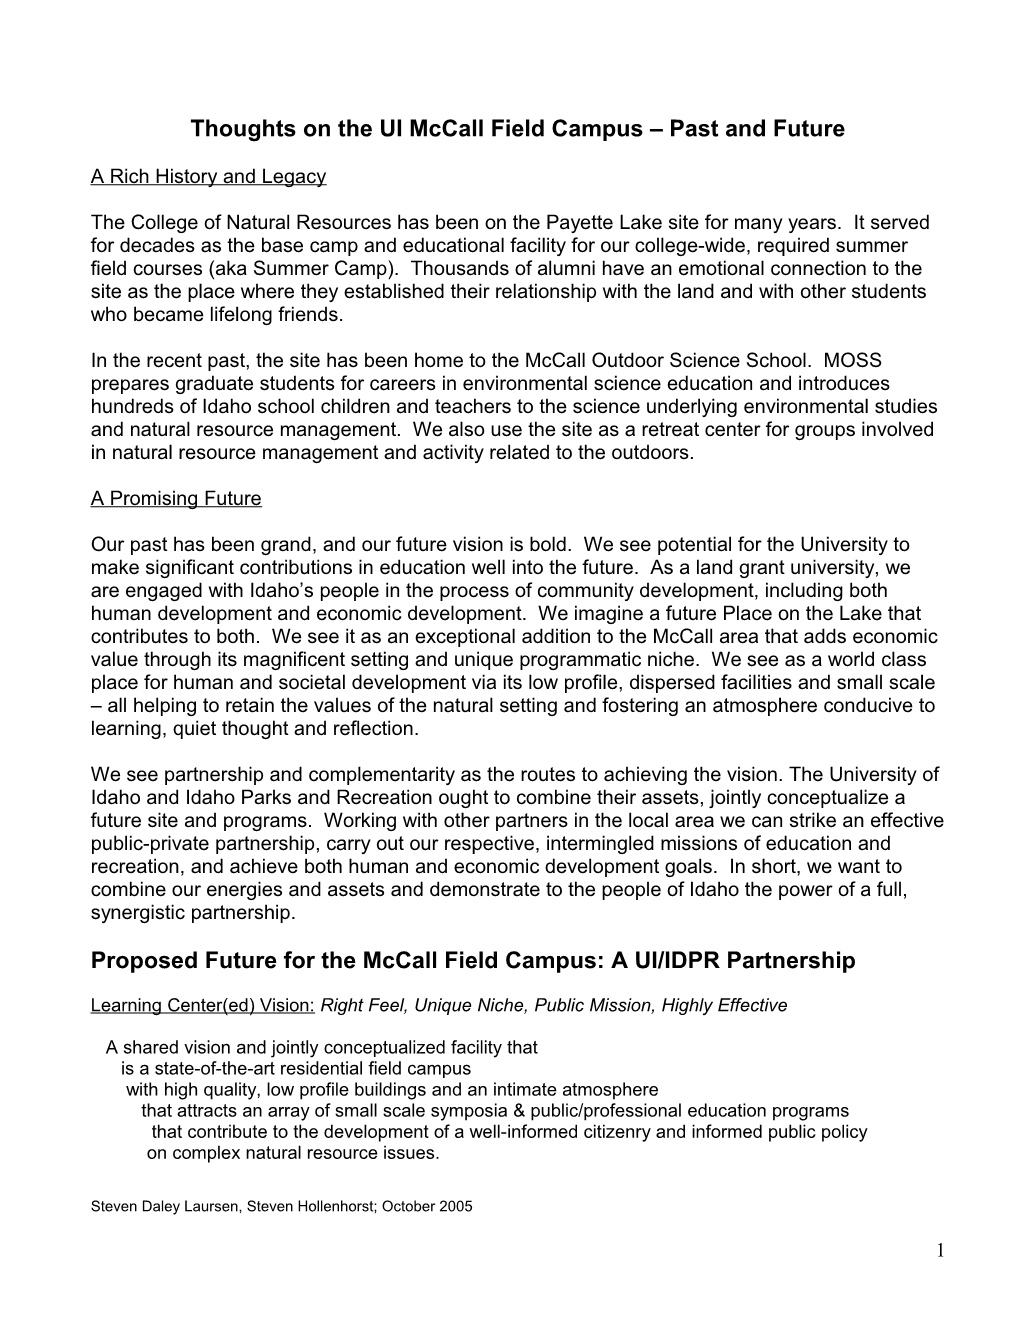 Proposed Future Direction for the Mccall Field Campus: a UI/IDPR Partnership